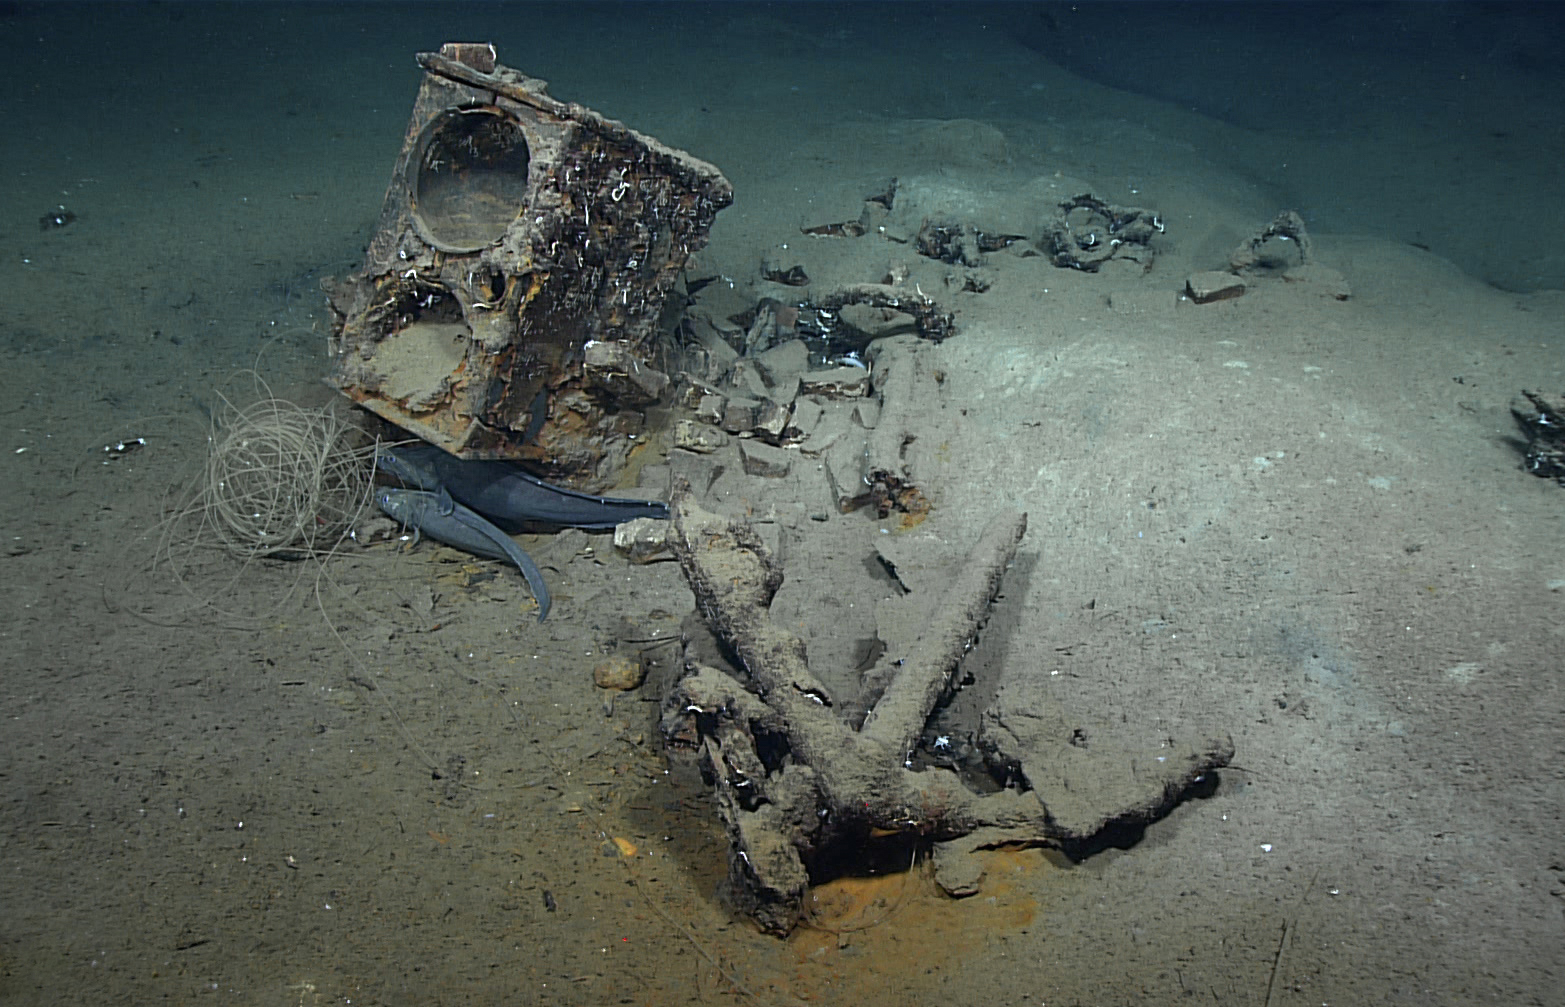 This image of the tryworks was taken from the shipwreck site of brig Industry by a NOAA ROV. The tryworks was a cast iron stove with two deep kettles used to render whale blubber into oil. It was manufactured by G & W Ashbridge, a Philadelphia company. 